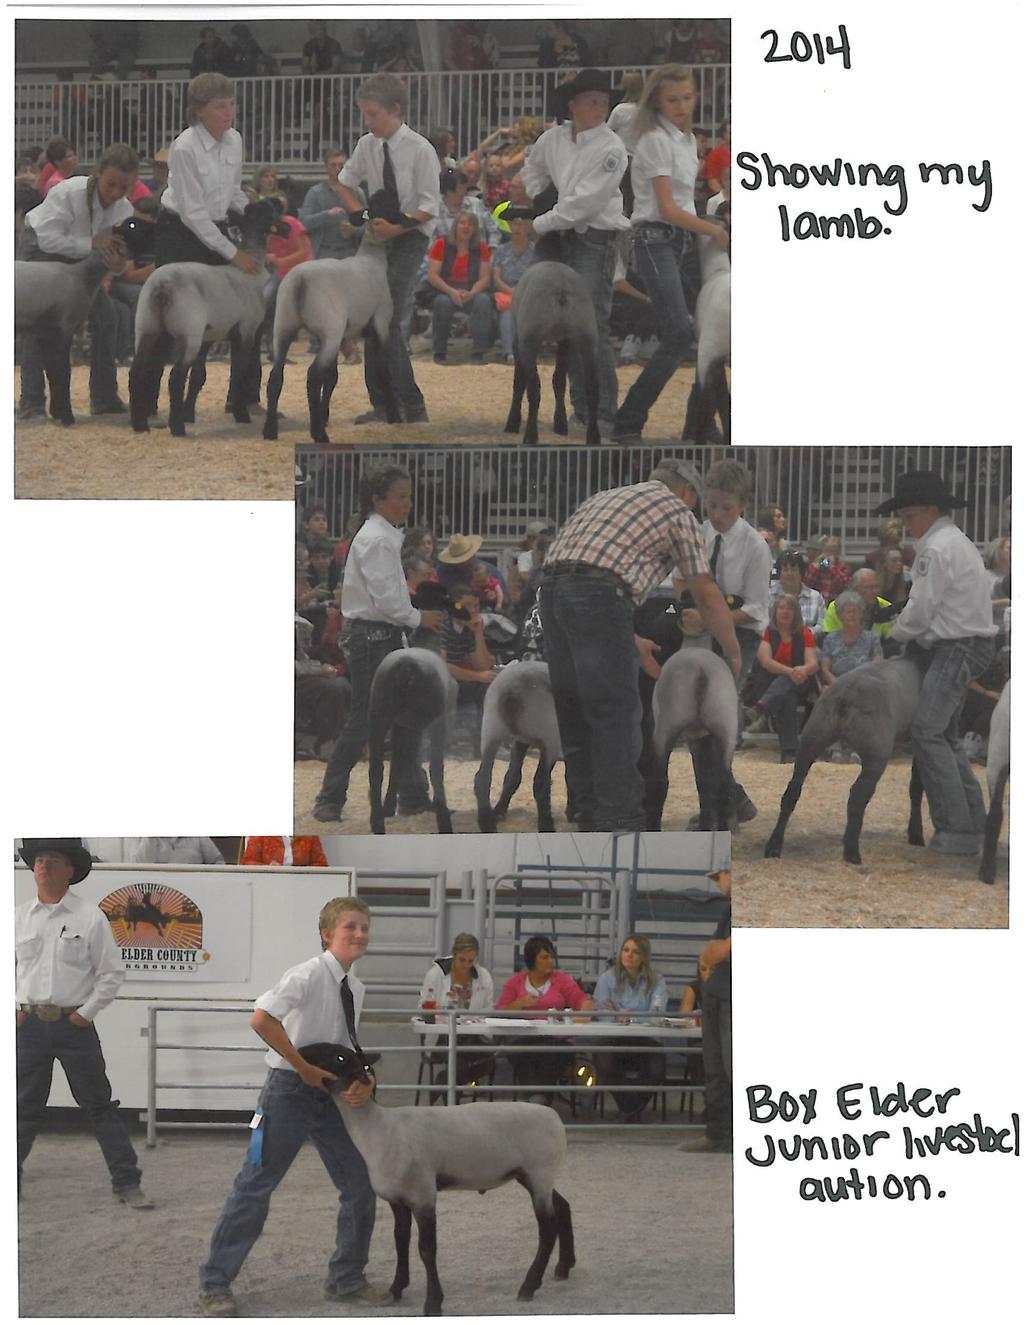 Our Junior Livestock Program will be the Subject of a Documentary Continued success of the Box Elder County Junior Livestock Sale stems from the steadfast support it receives from the local community